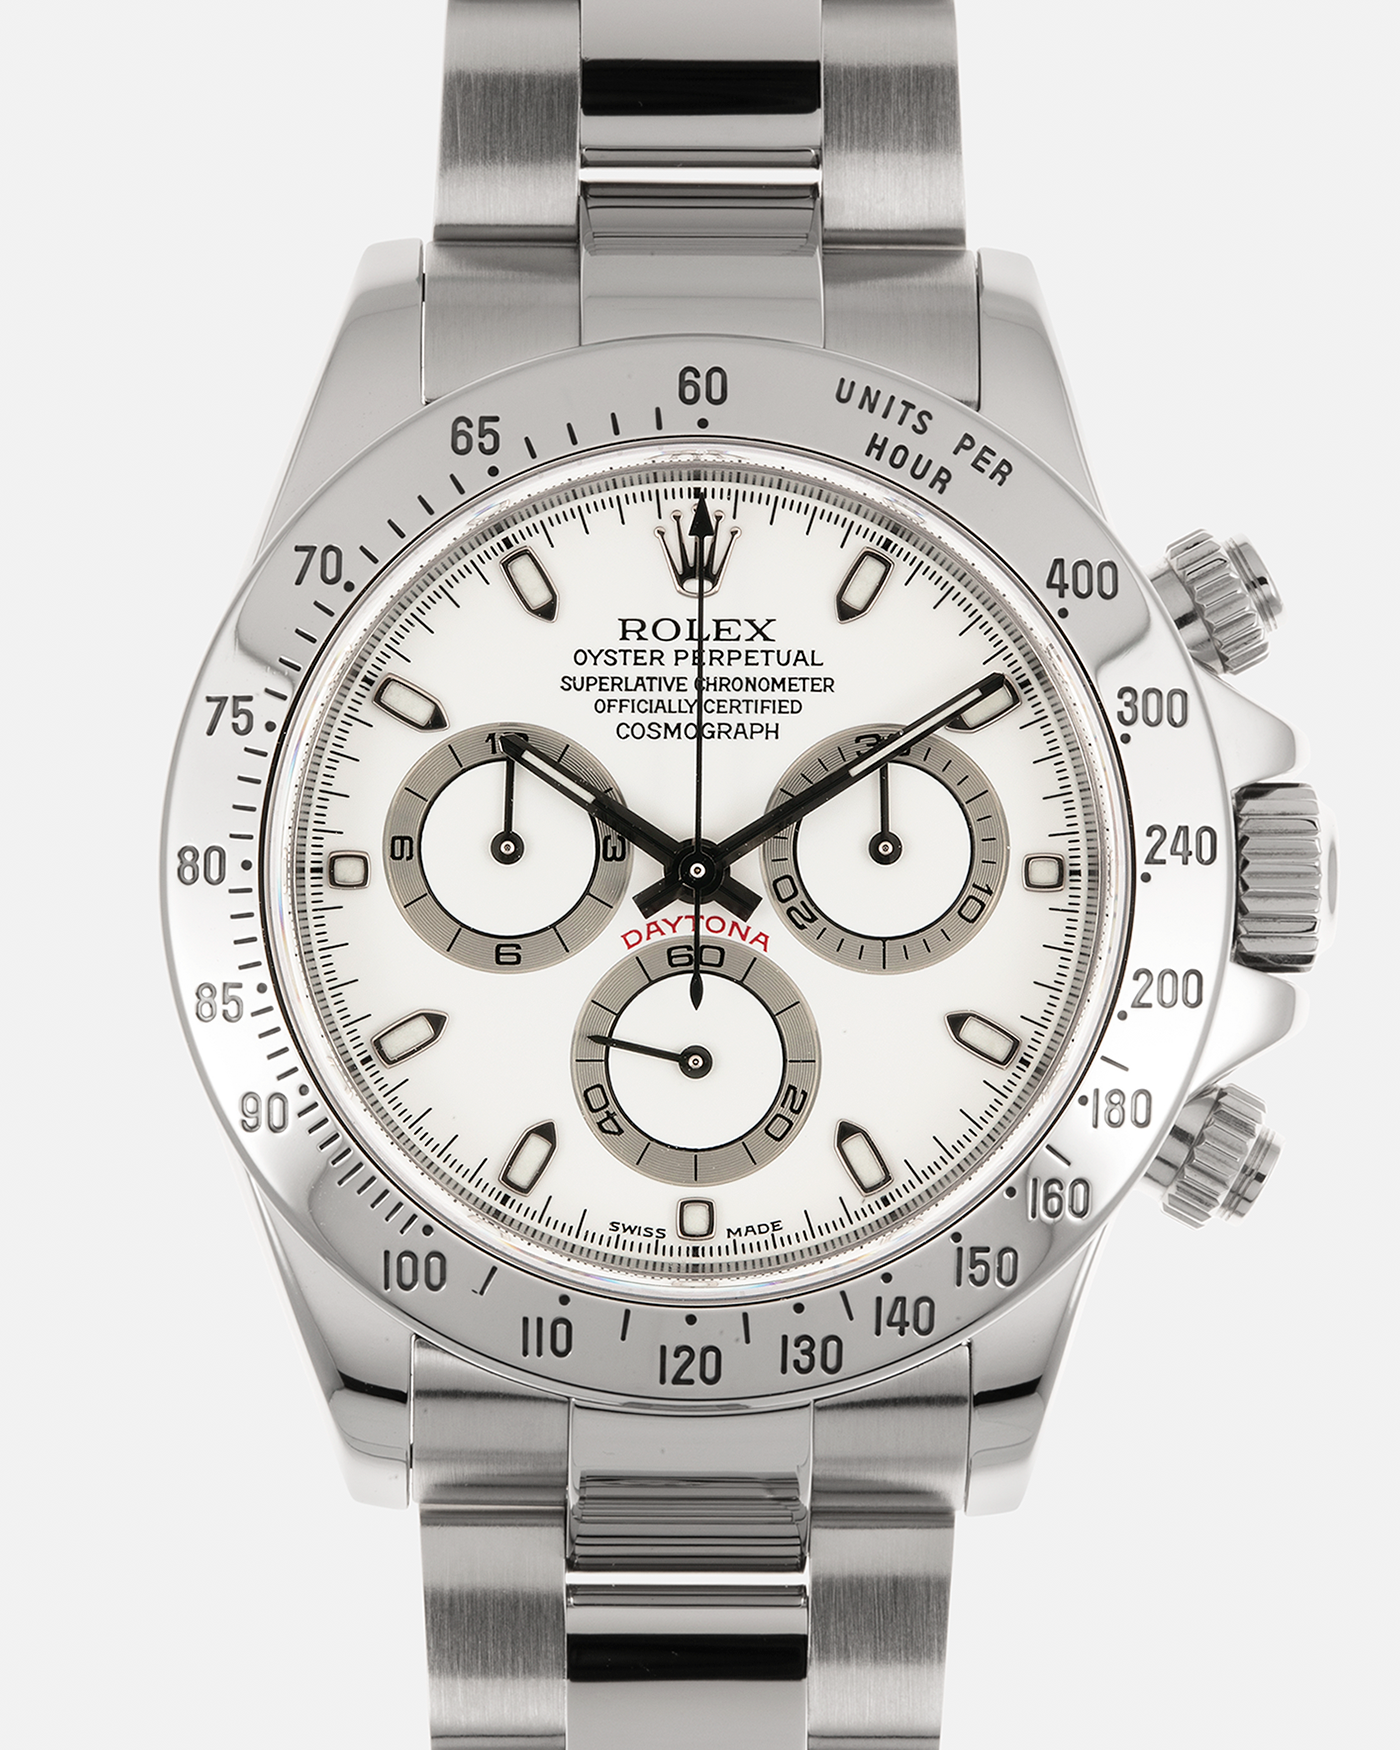 Brand: Rolex Year: 2000 Model: Cosmograph Daytona Reference: 116520 Serial Number: P414XXX Material: Stainless Steel Movement: Rolex Cal. 4130, Self-Winding Case Diameter: 40mm Lug Width: 20mm Bracelet: Rolex Oyster ‘DE2 78490’ Bracelet in Stainless Steel